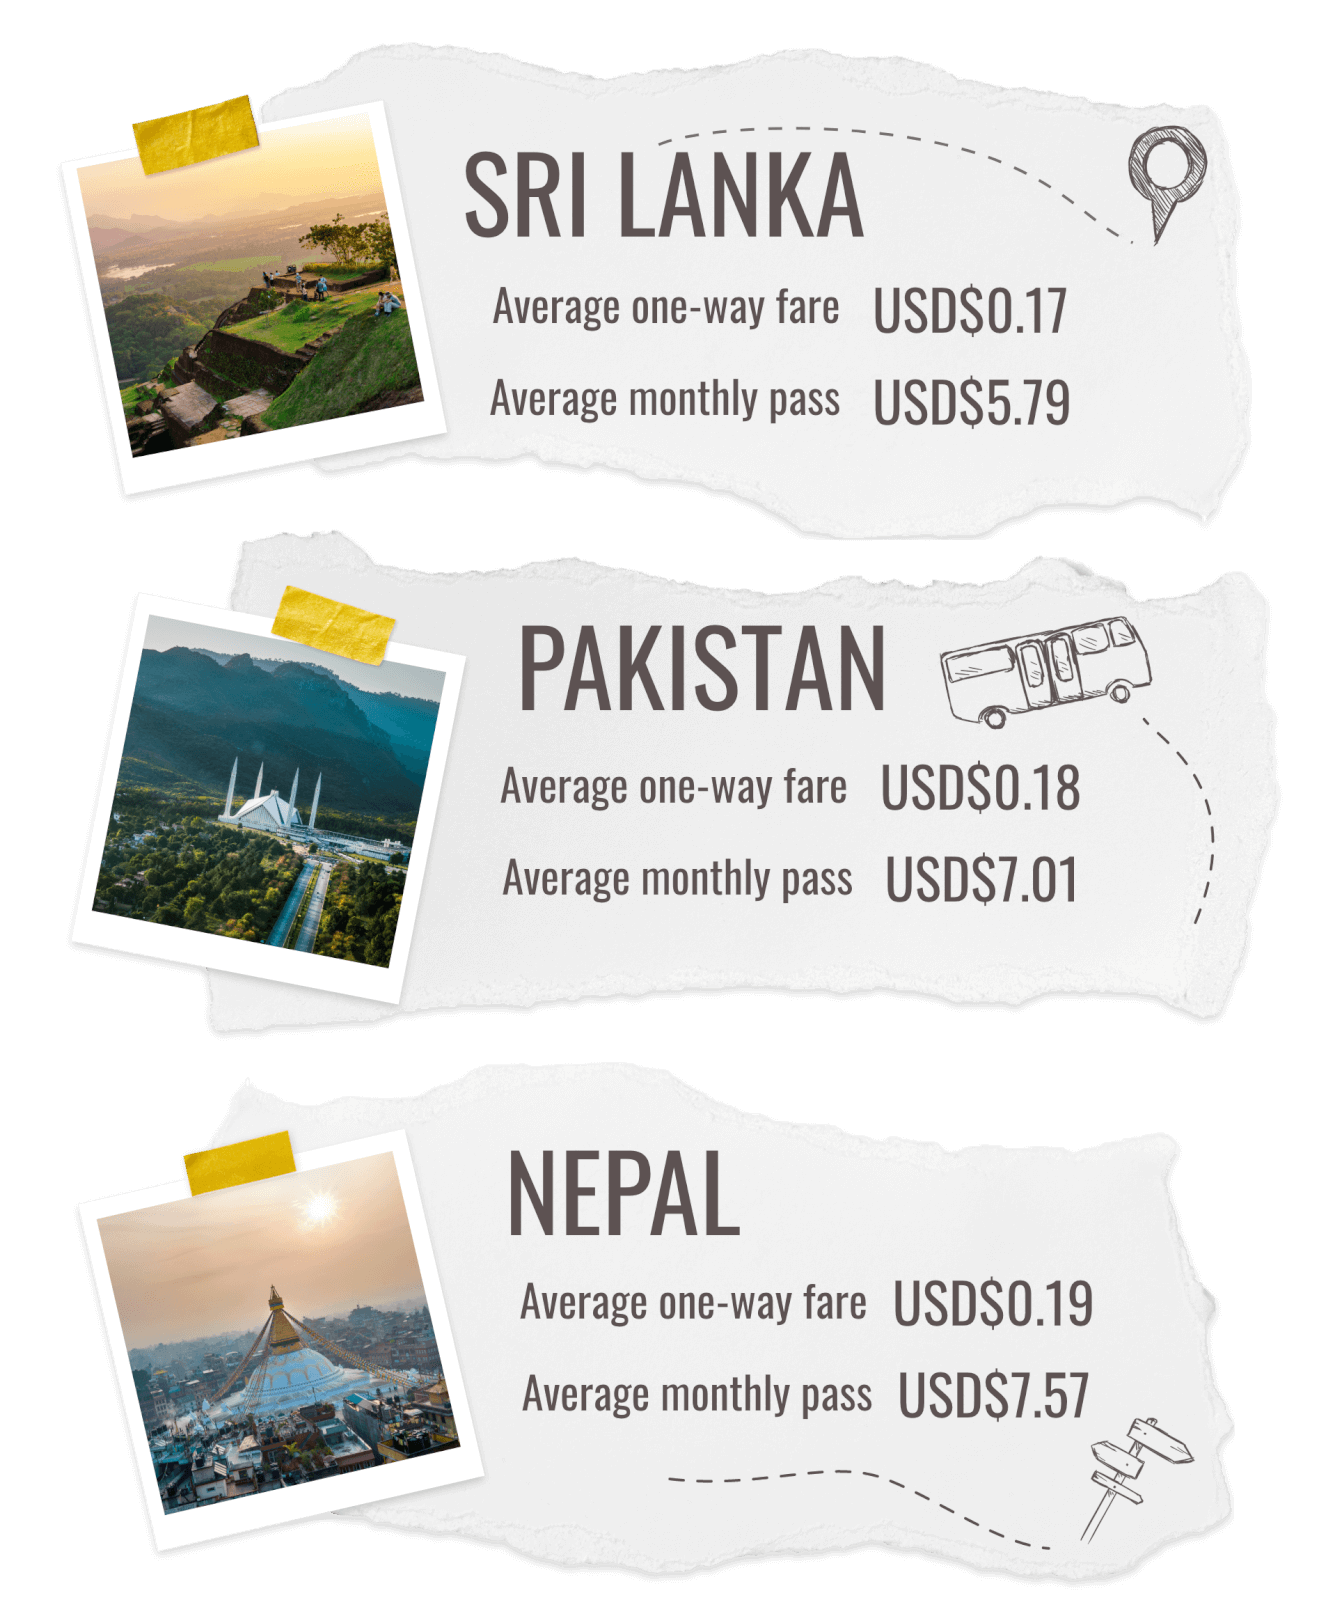 An infographic showing the three cheapest countries in the world for public transport